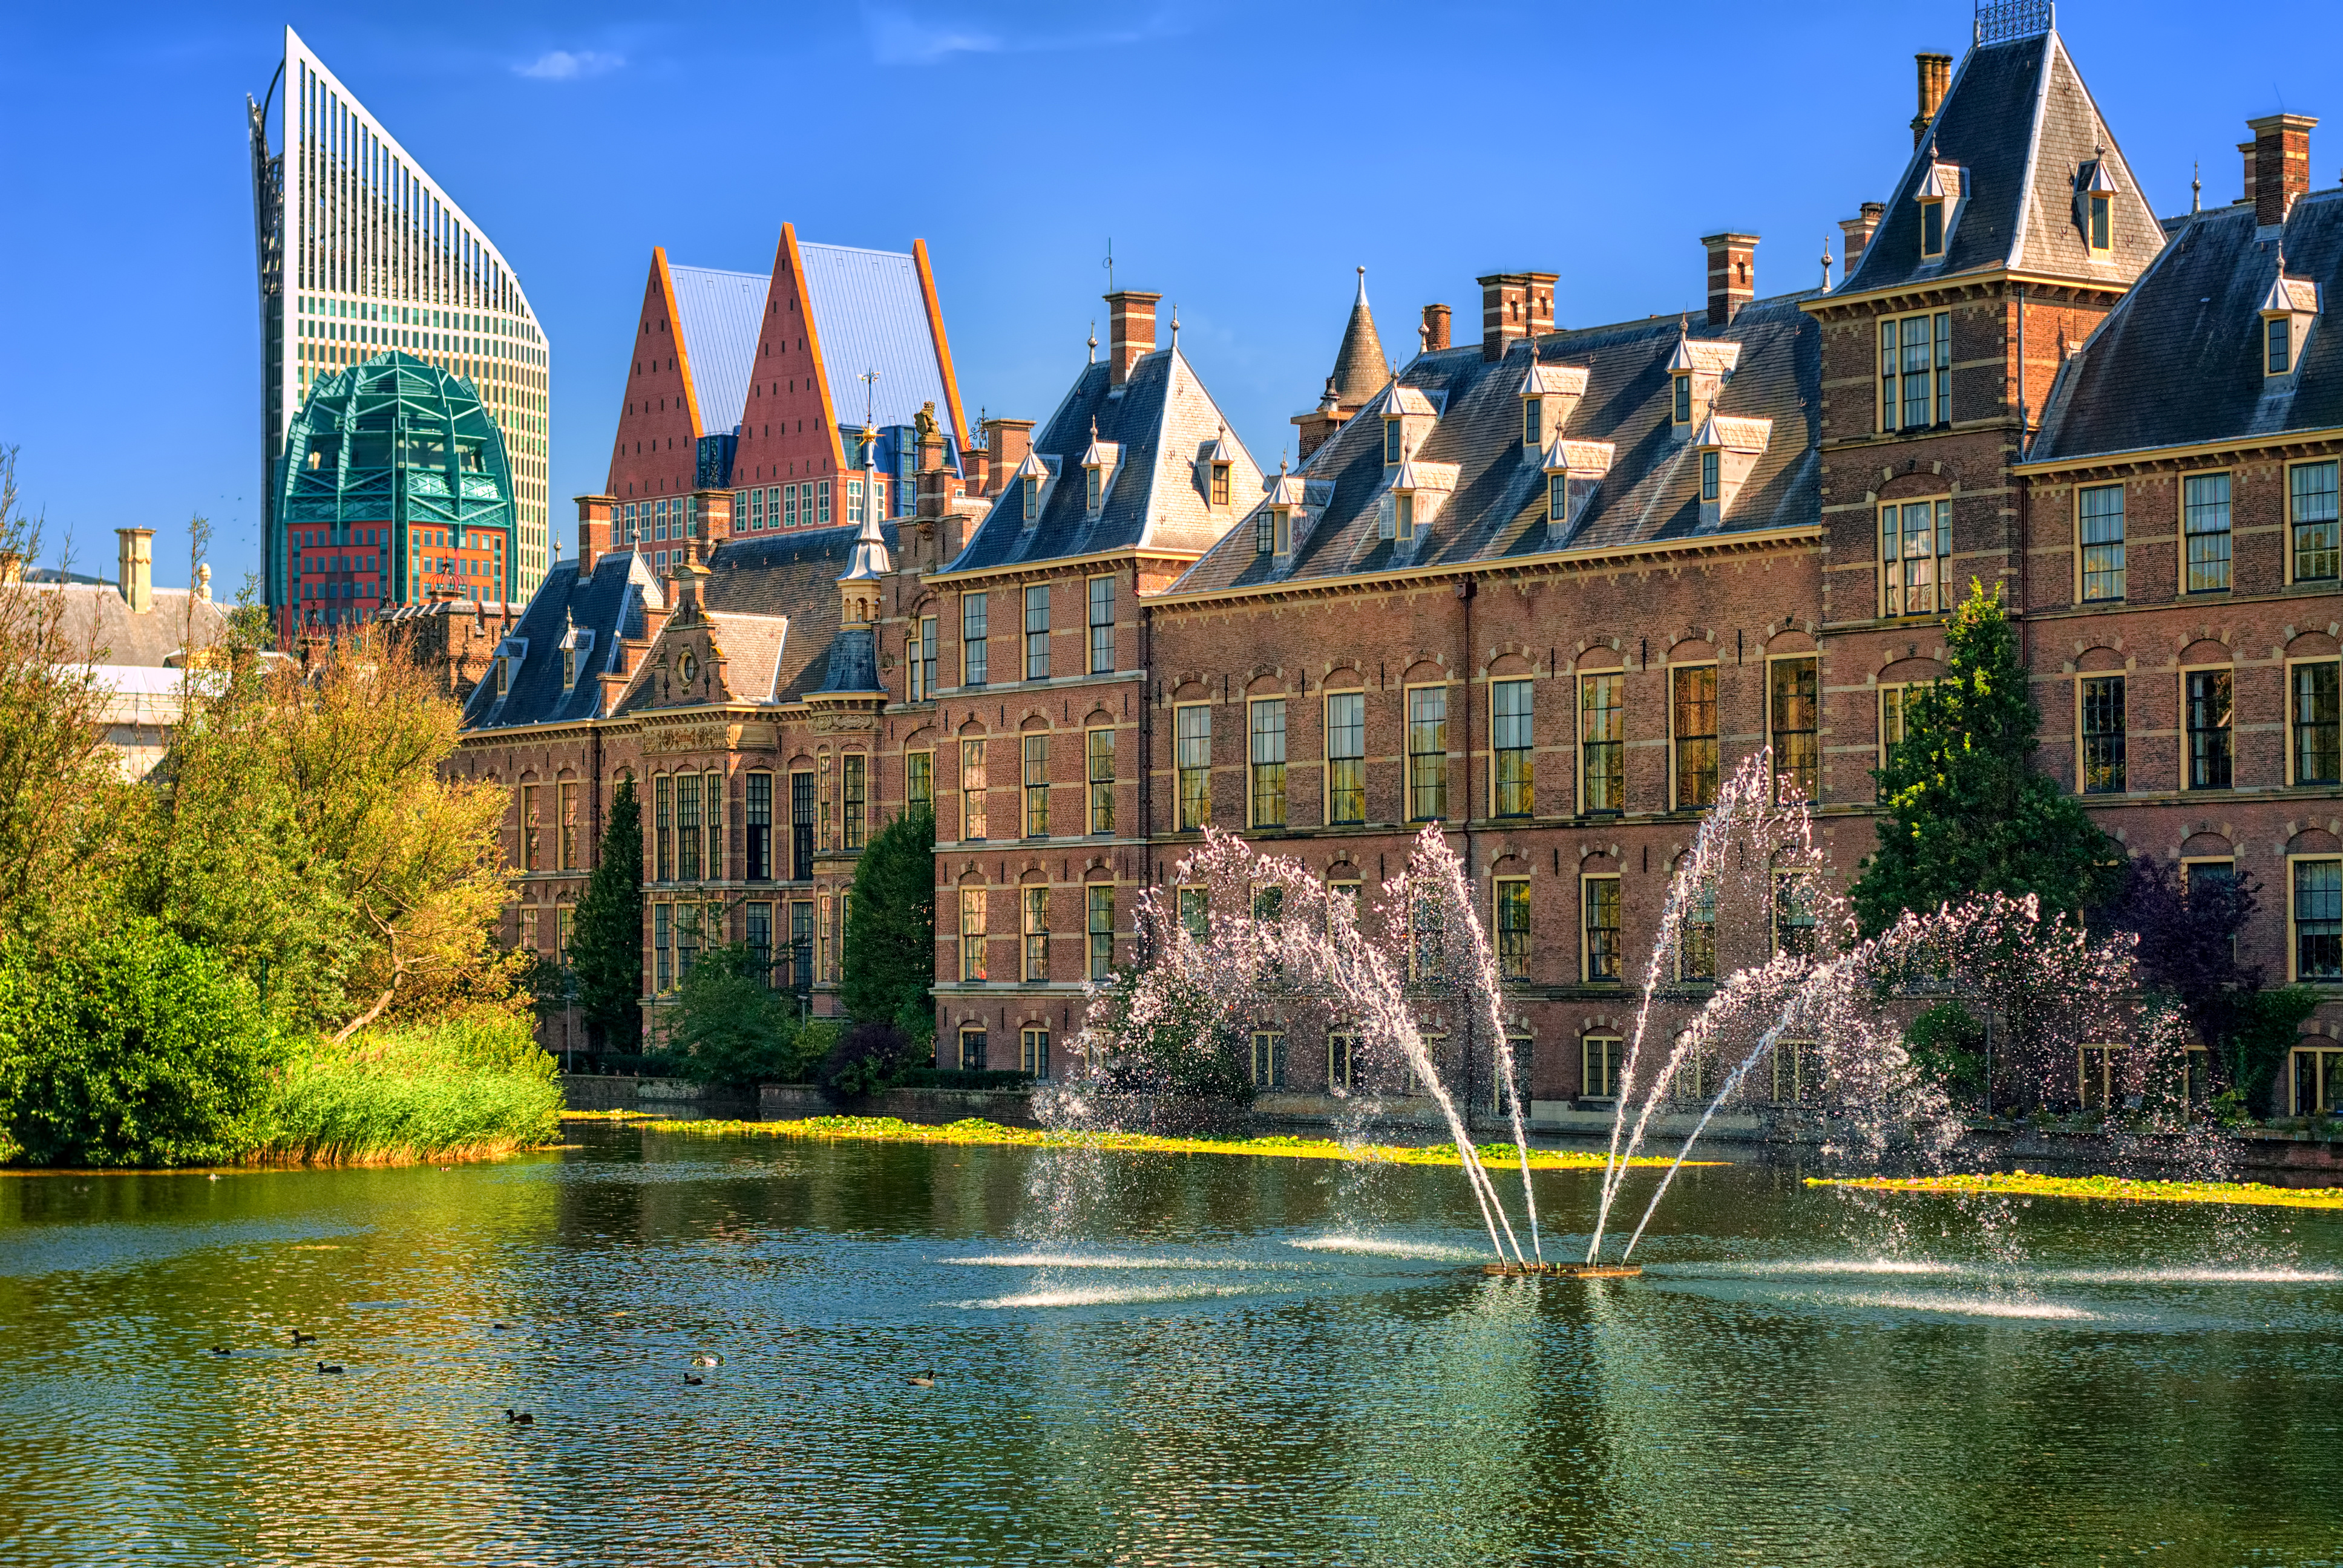 Man Made The Hague HD Wallpaper | Background Image